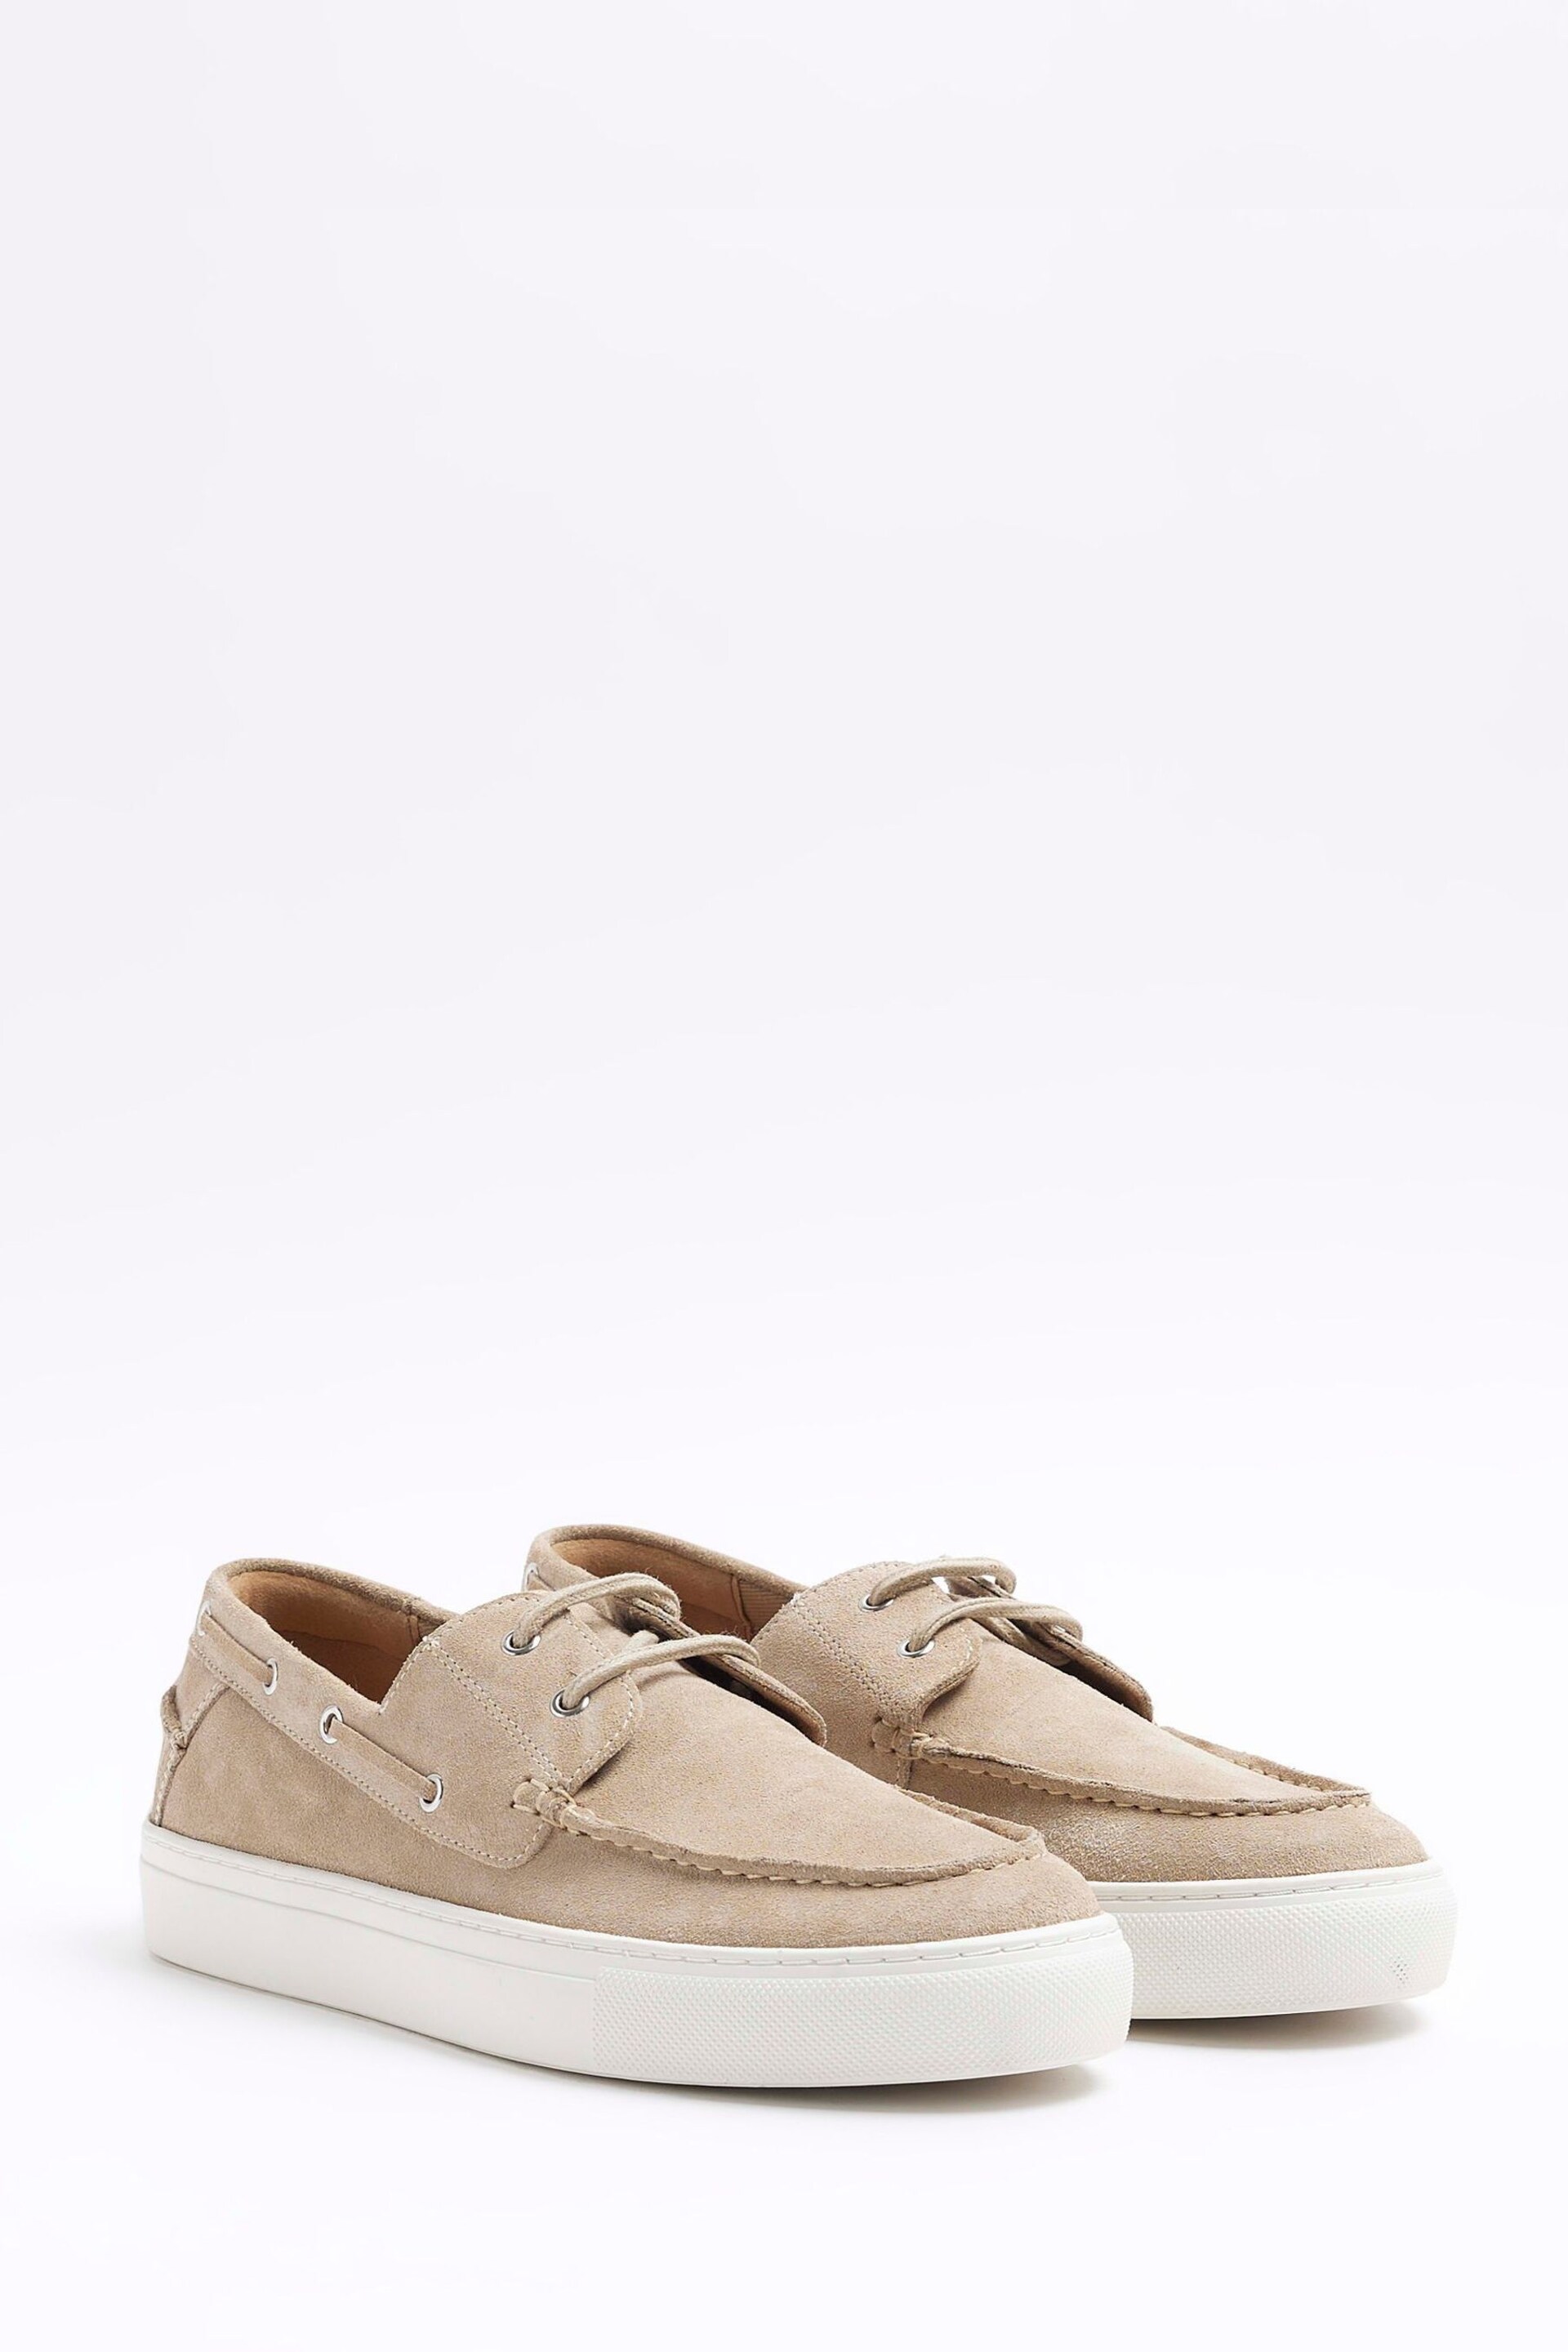 River Island Brown Suede Boat Shoes - Image 2 of 4